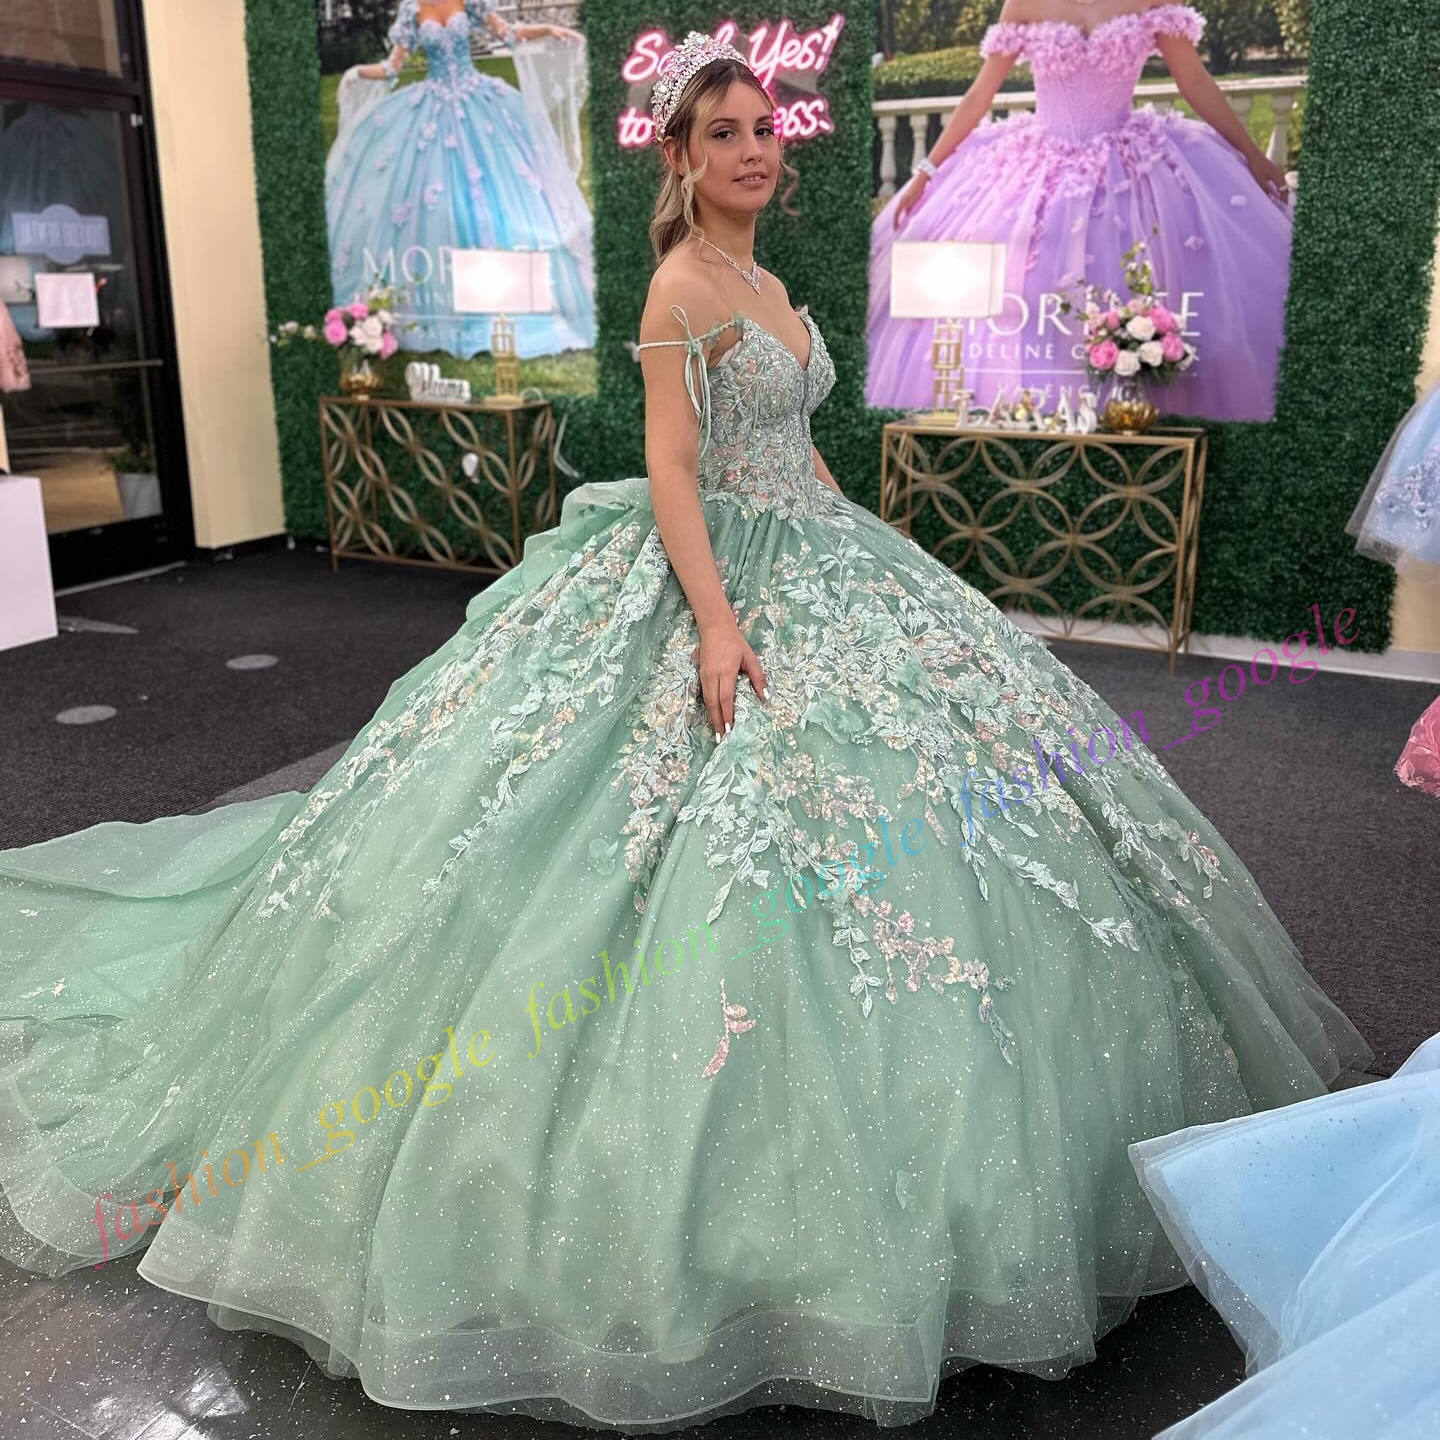 3D Floral Sequin Quinceanera Dress Glitter Tulle Ball Mexican Quince Sweet 15/16 Birthday Party Gown for 15th Girl Drama Winter Formal Prom Gala Orchid Sage Bow Straps